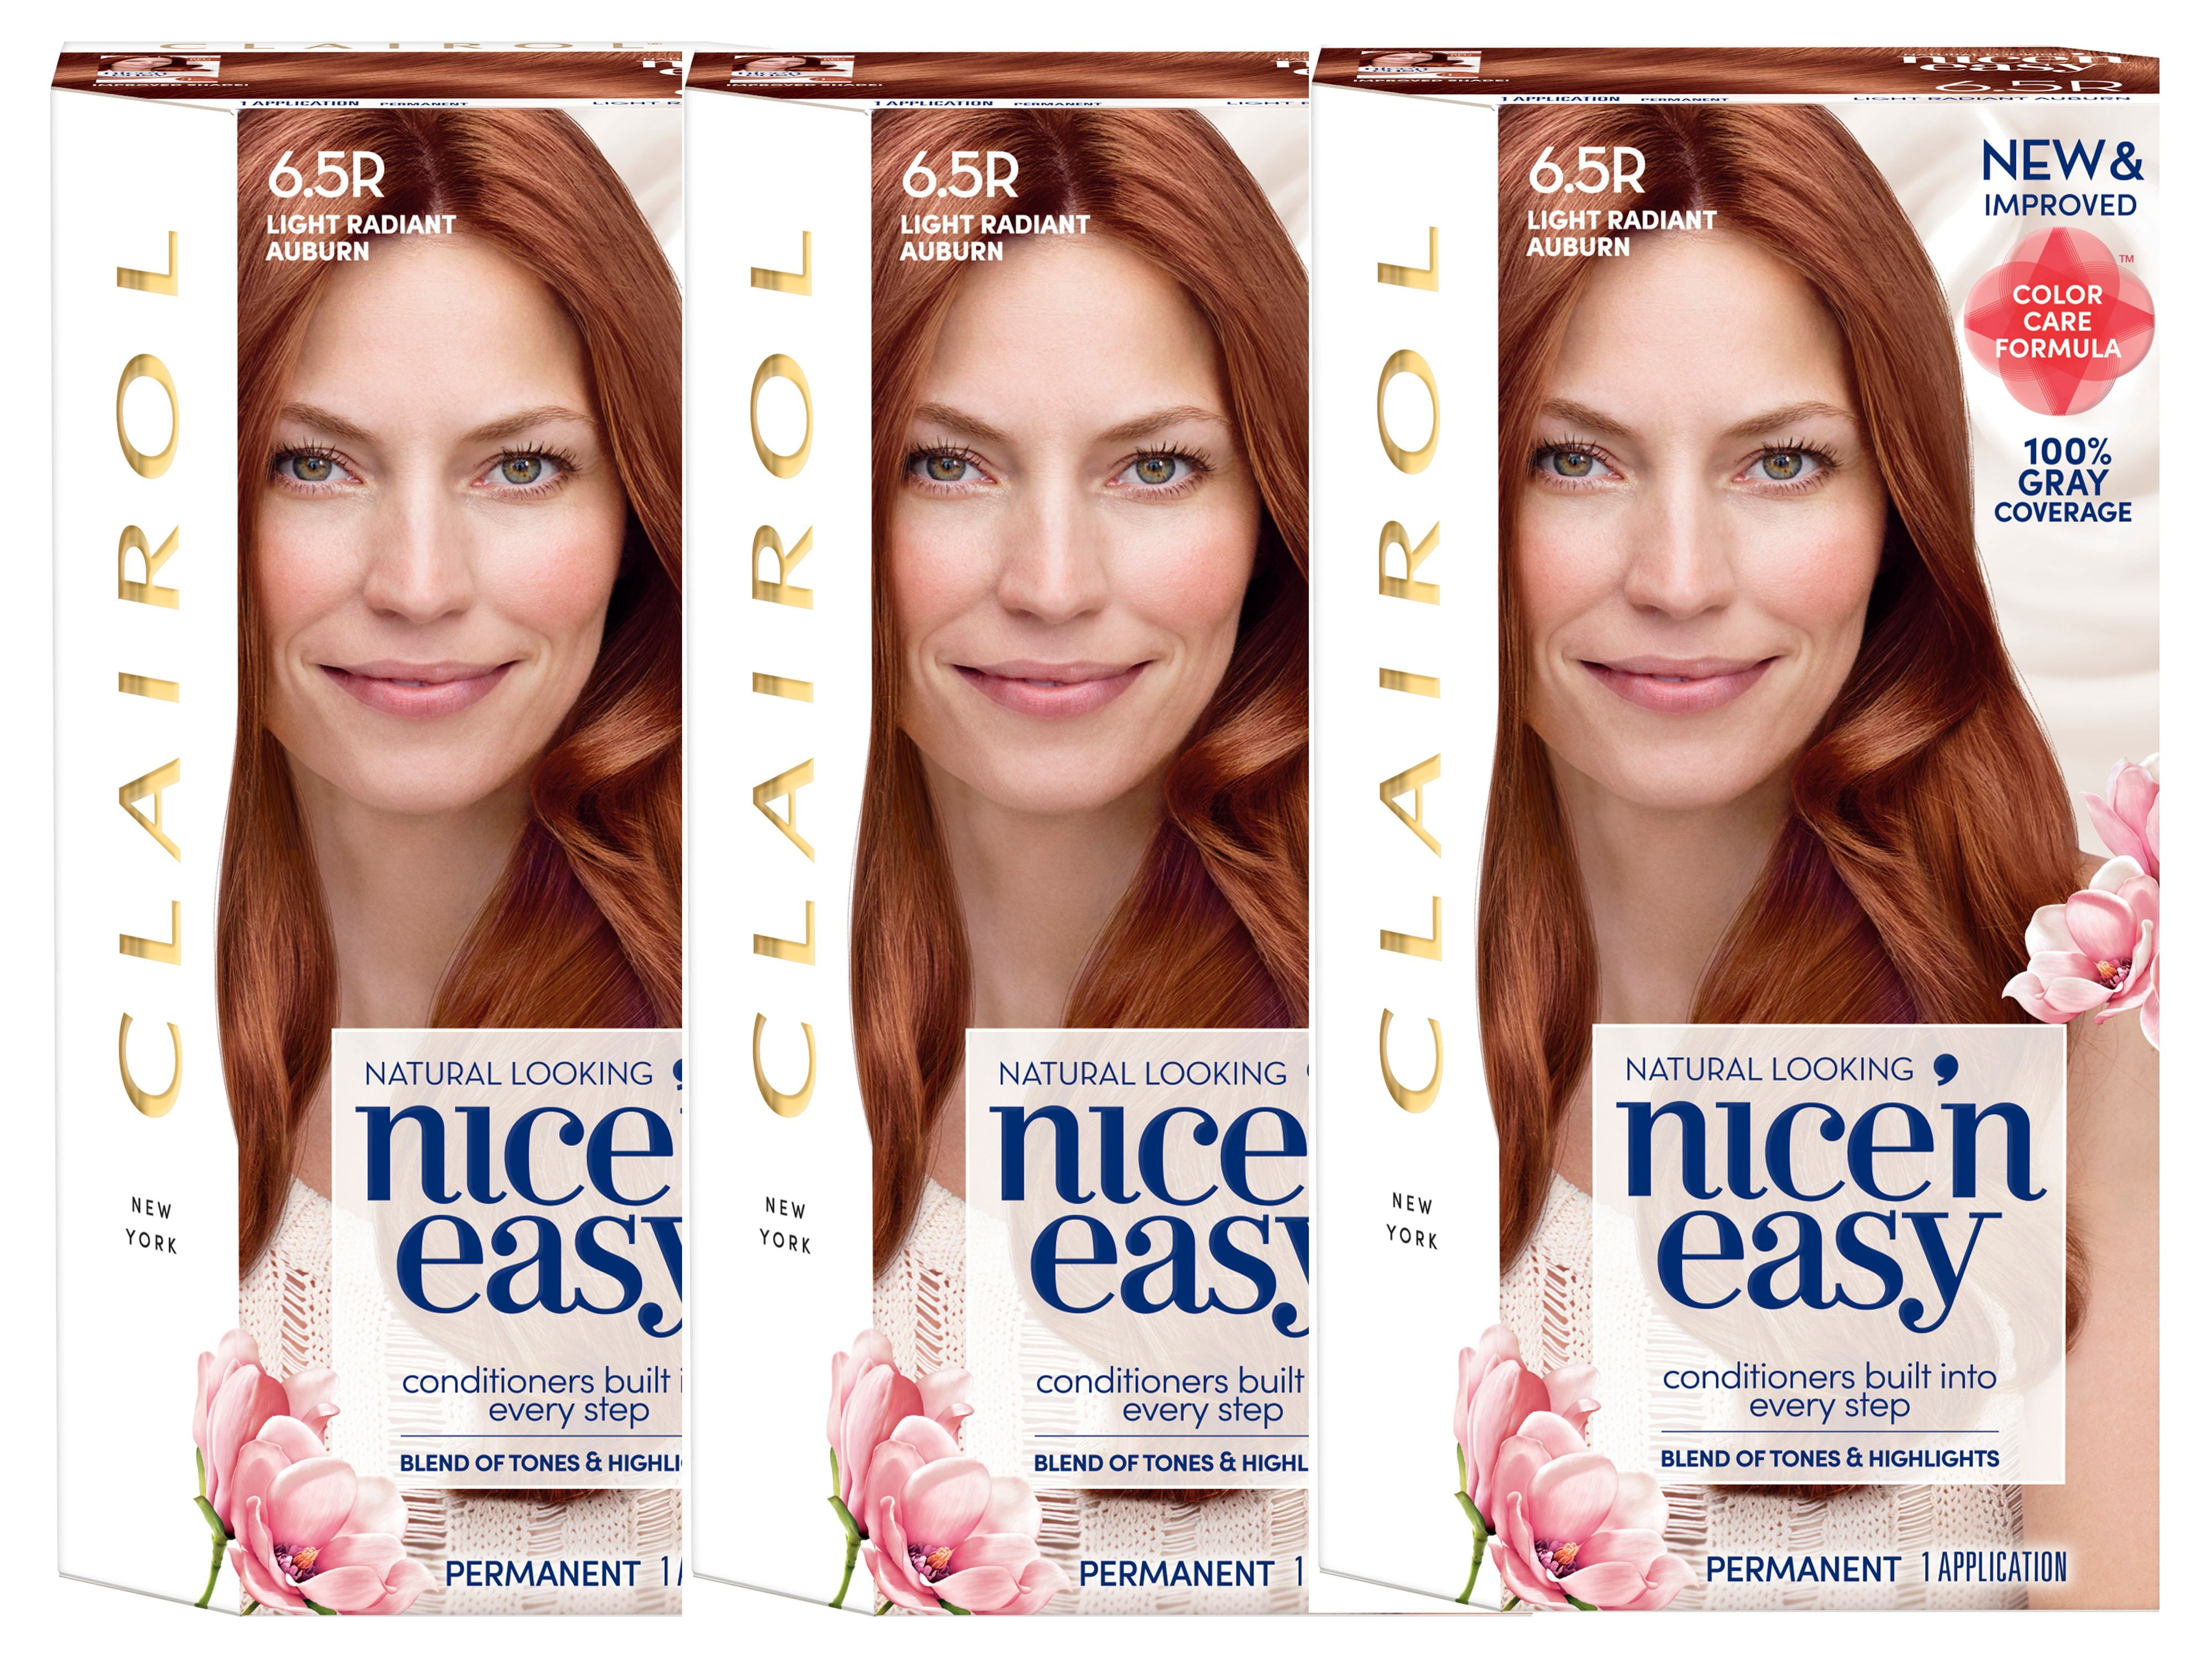 3. Clairol Nice'n Easy Permanent Hair Color, 10PB Extra Light Pale Blonde - wide 5